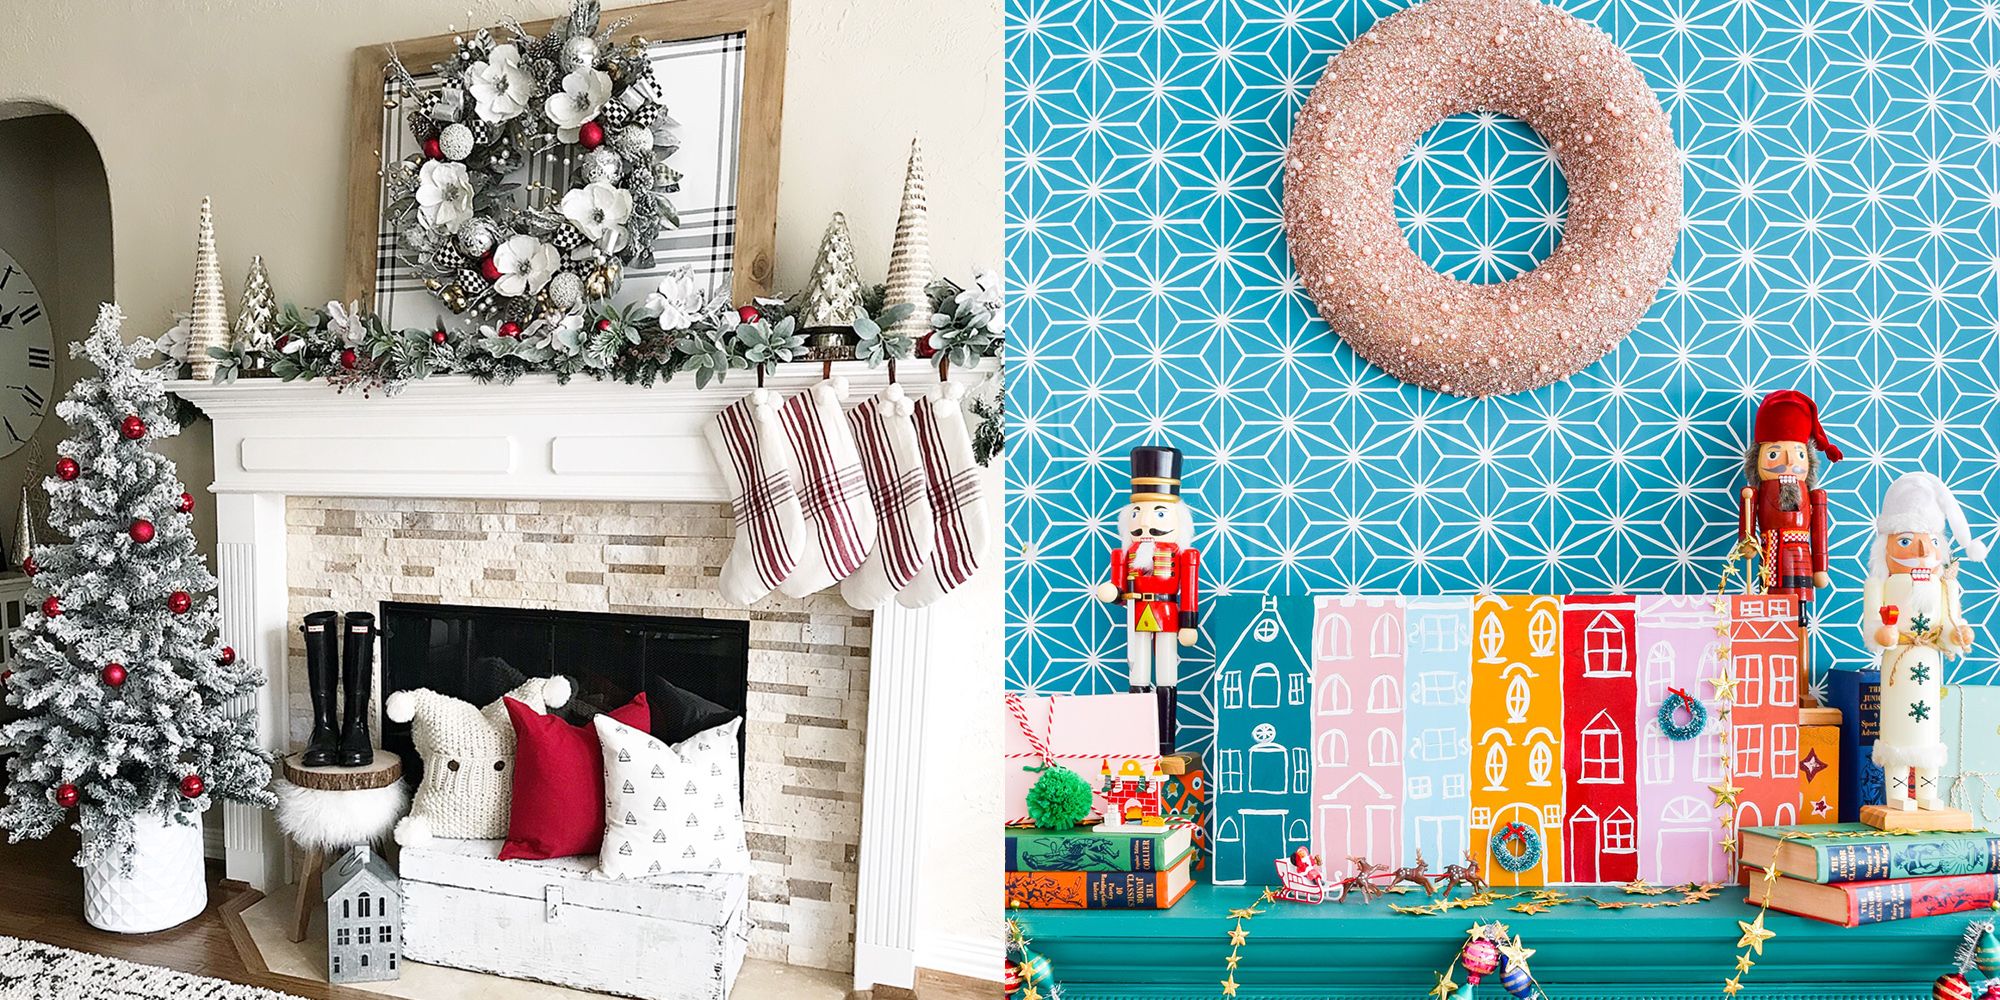 20 Festive Christmas Mantel Ideas How To Style A Holiday